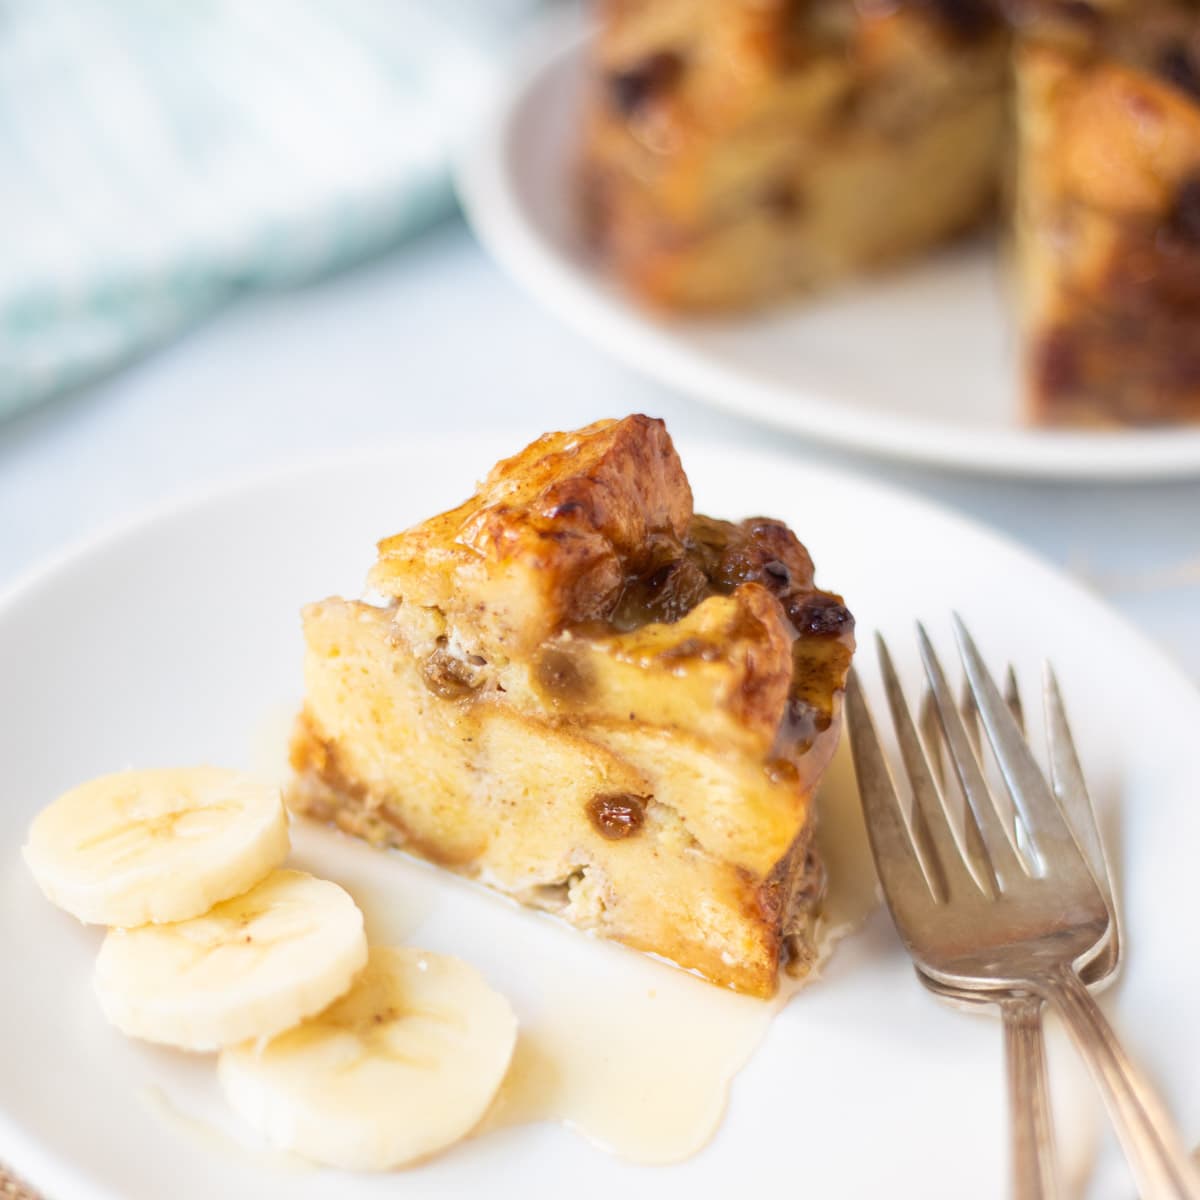 bread pudding drizzled with syrup and sliced banana on the side.